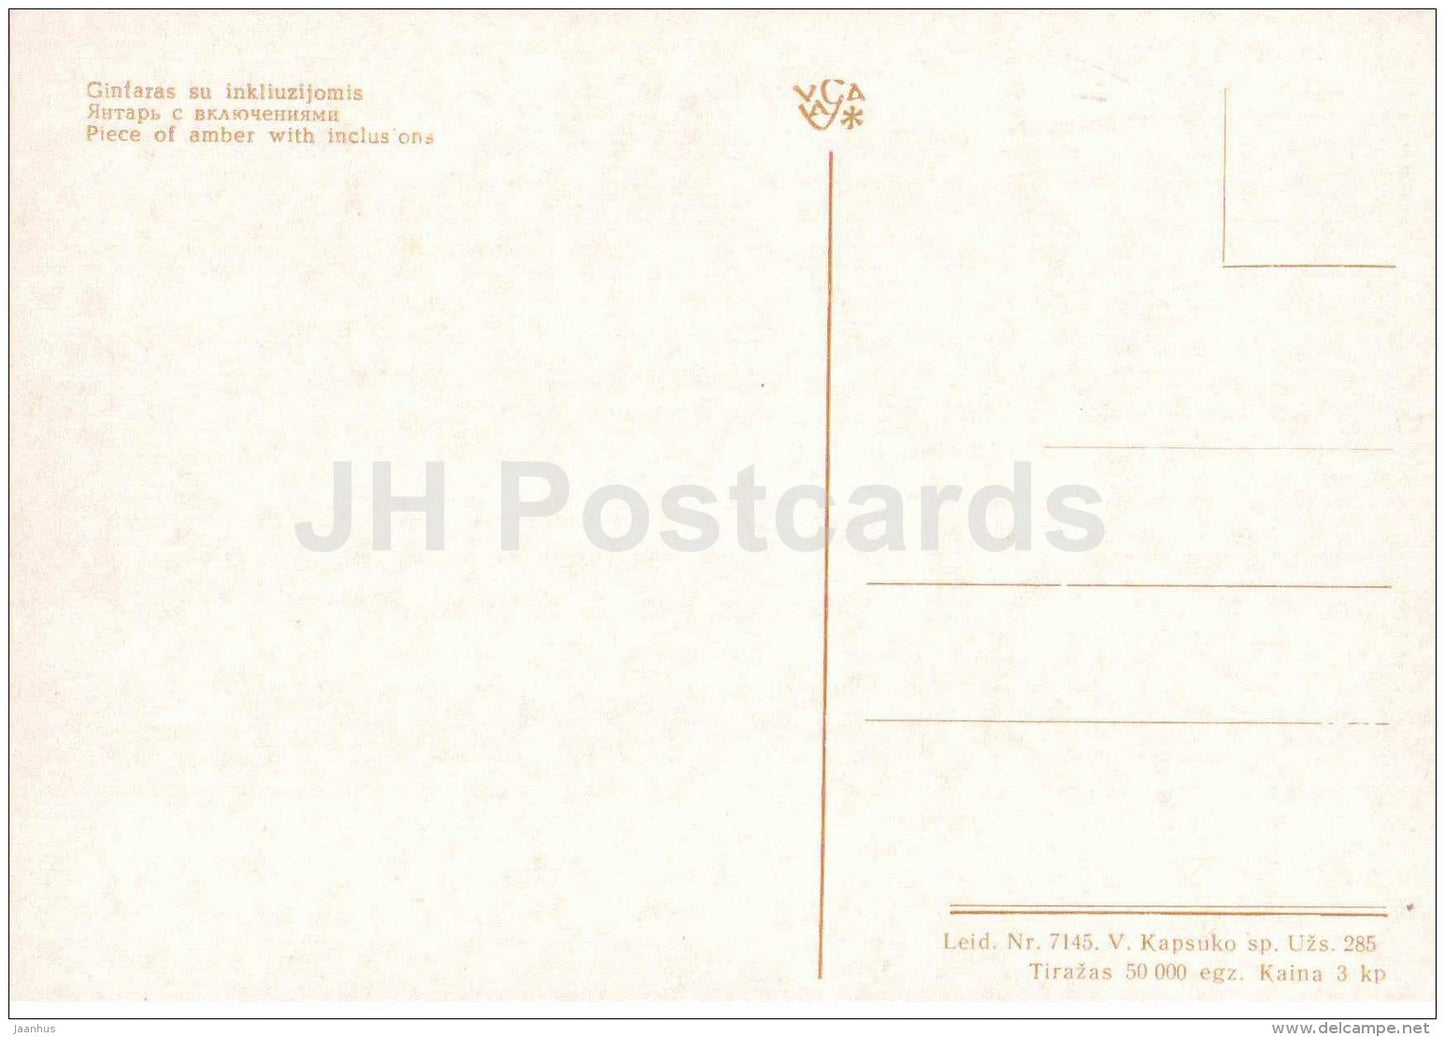 Piece of Amber with Inclusions - 2 - Amber - Gintaras - 1973 - Lithuania USSR - unused - JH Postcards